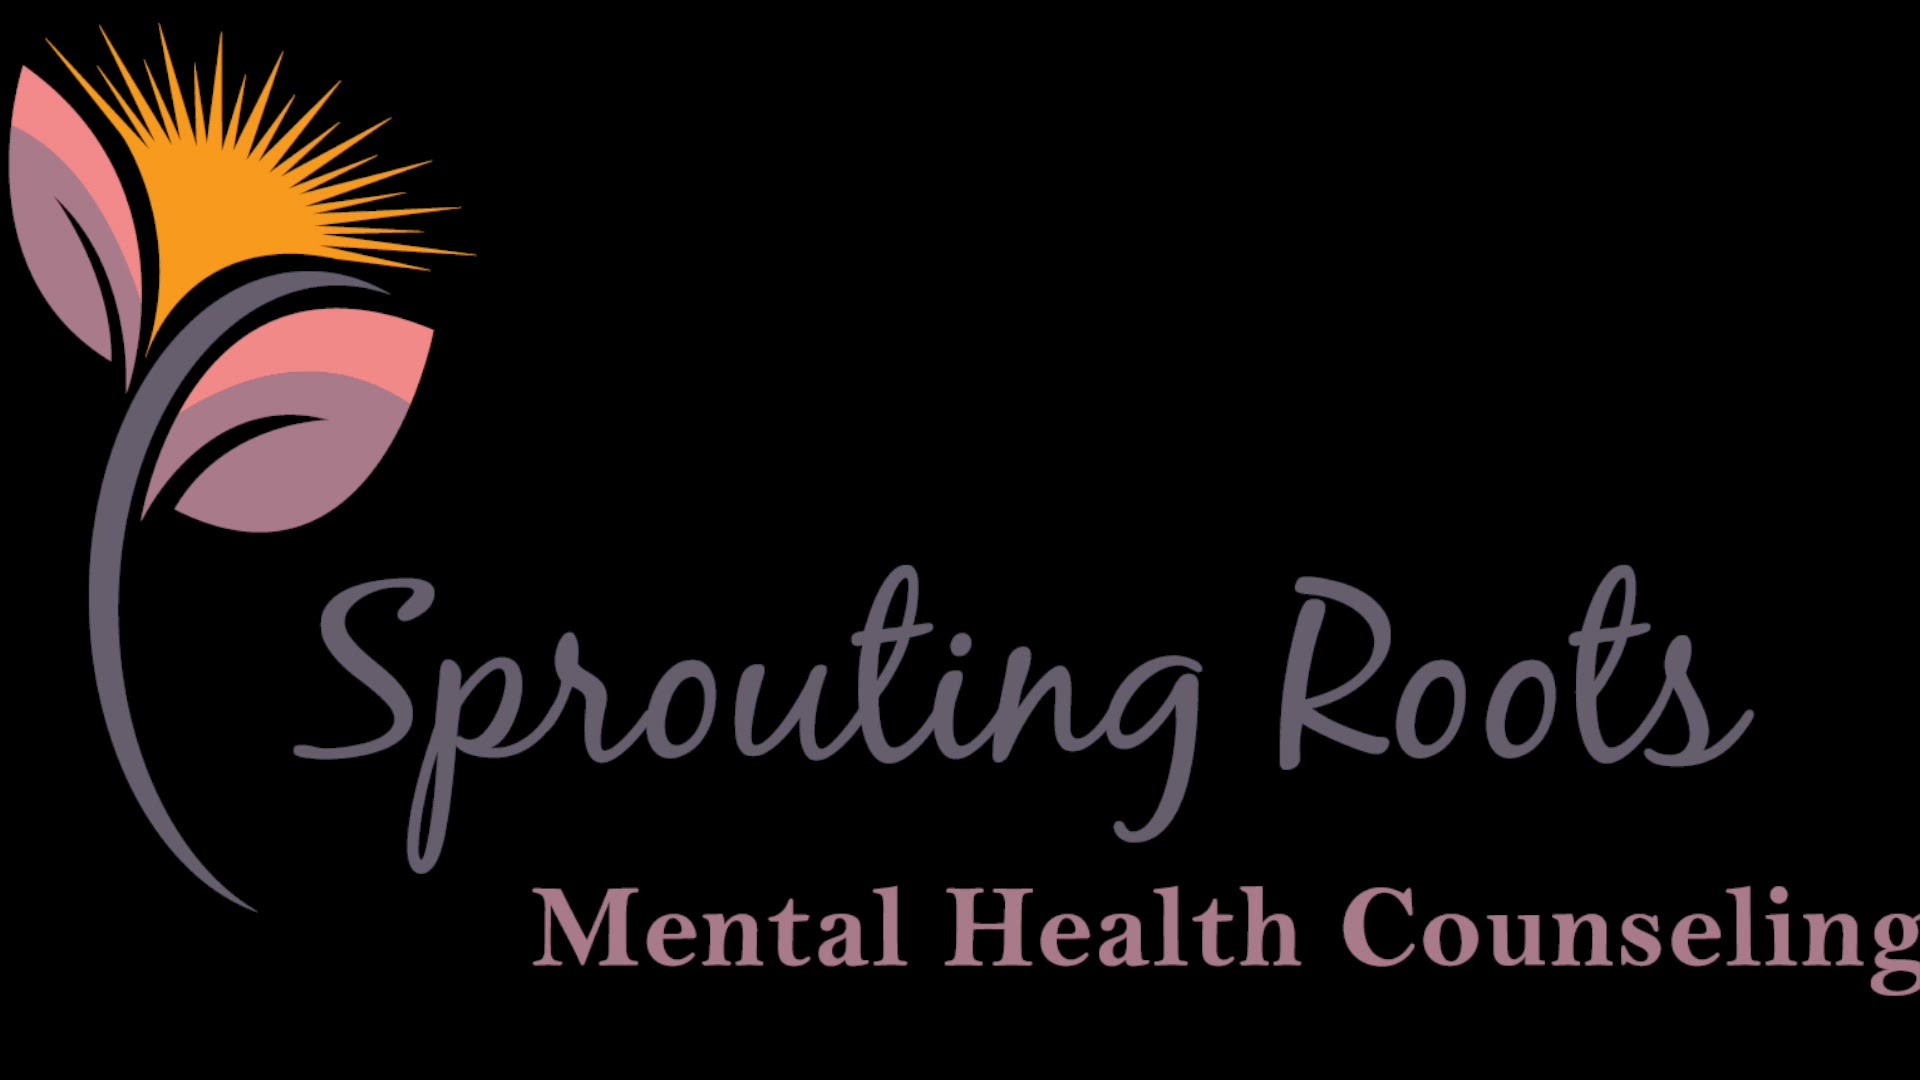 Sprouting Roots Mental Health Counseling